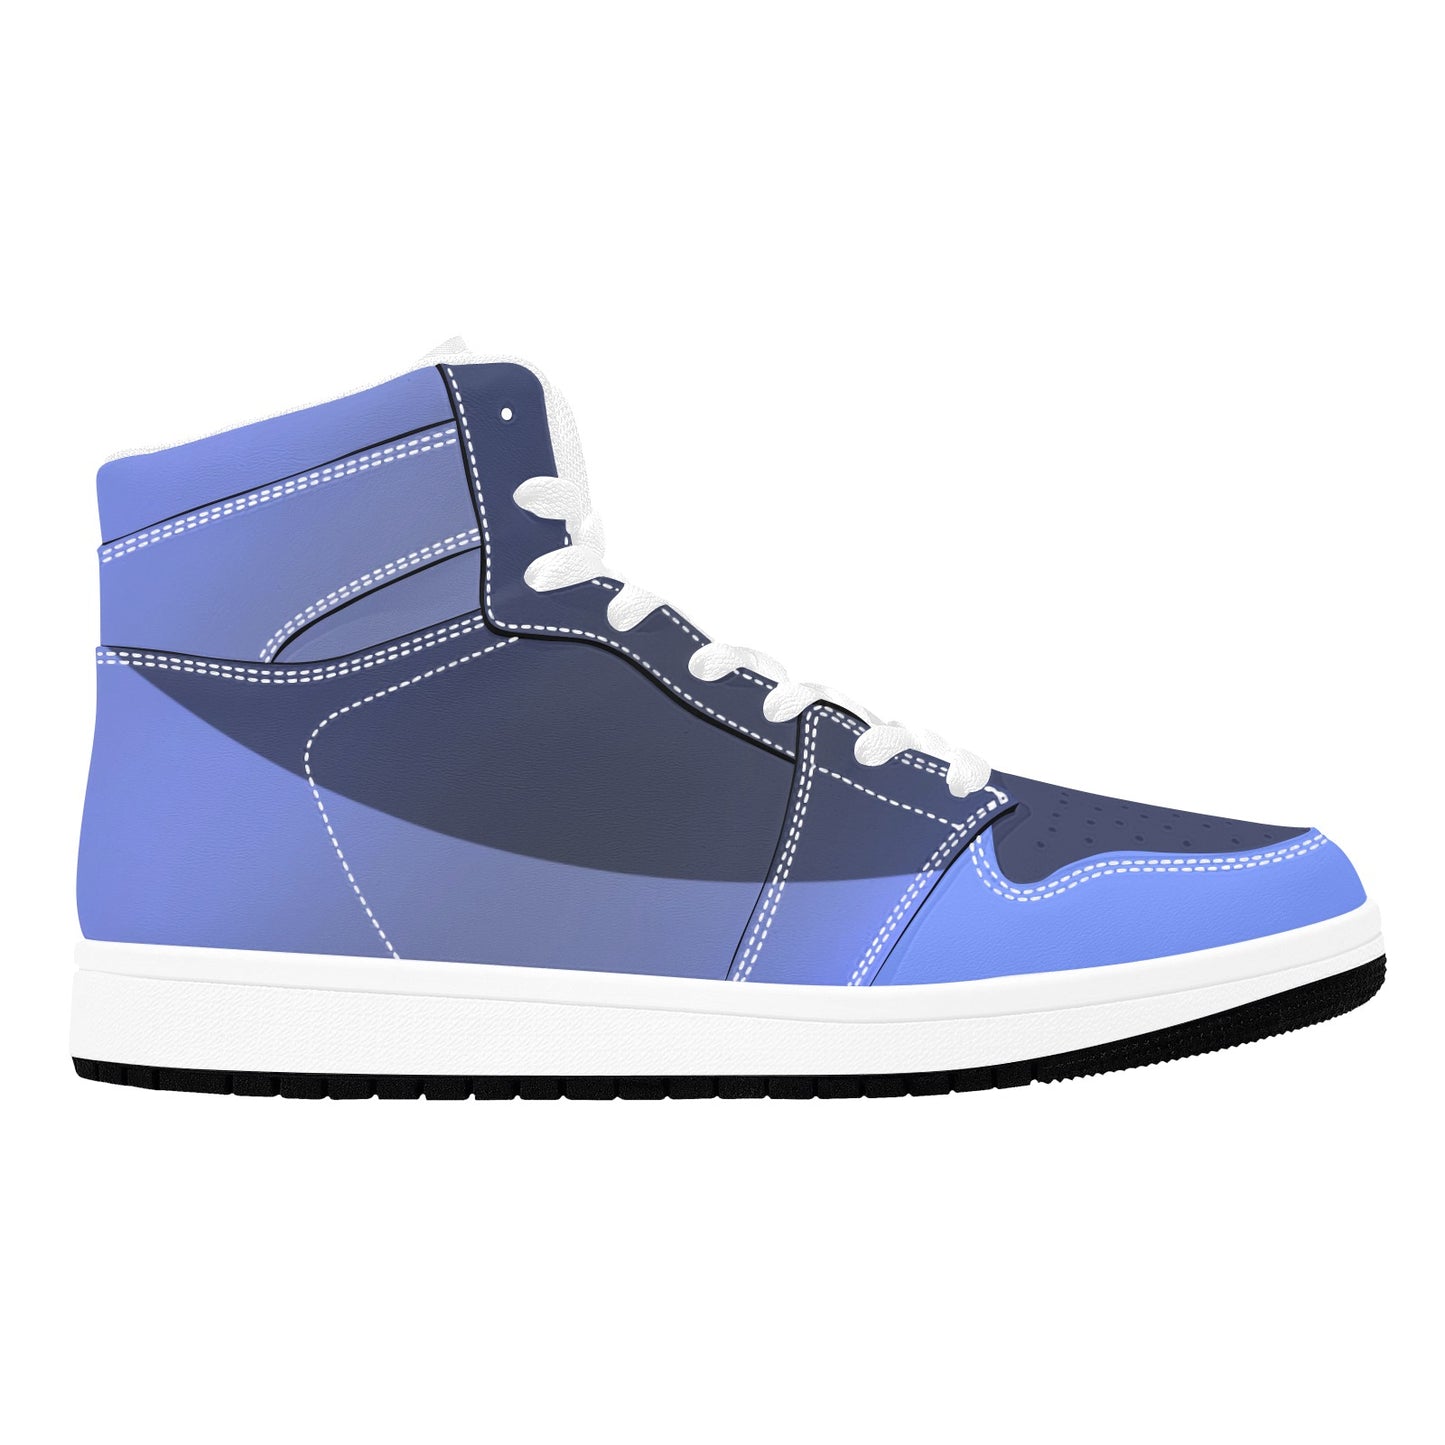 Blue High Top Sneakers Blue Colors High Top Sneakers Men's High Top Sneakers